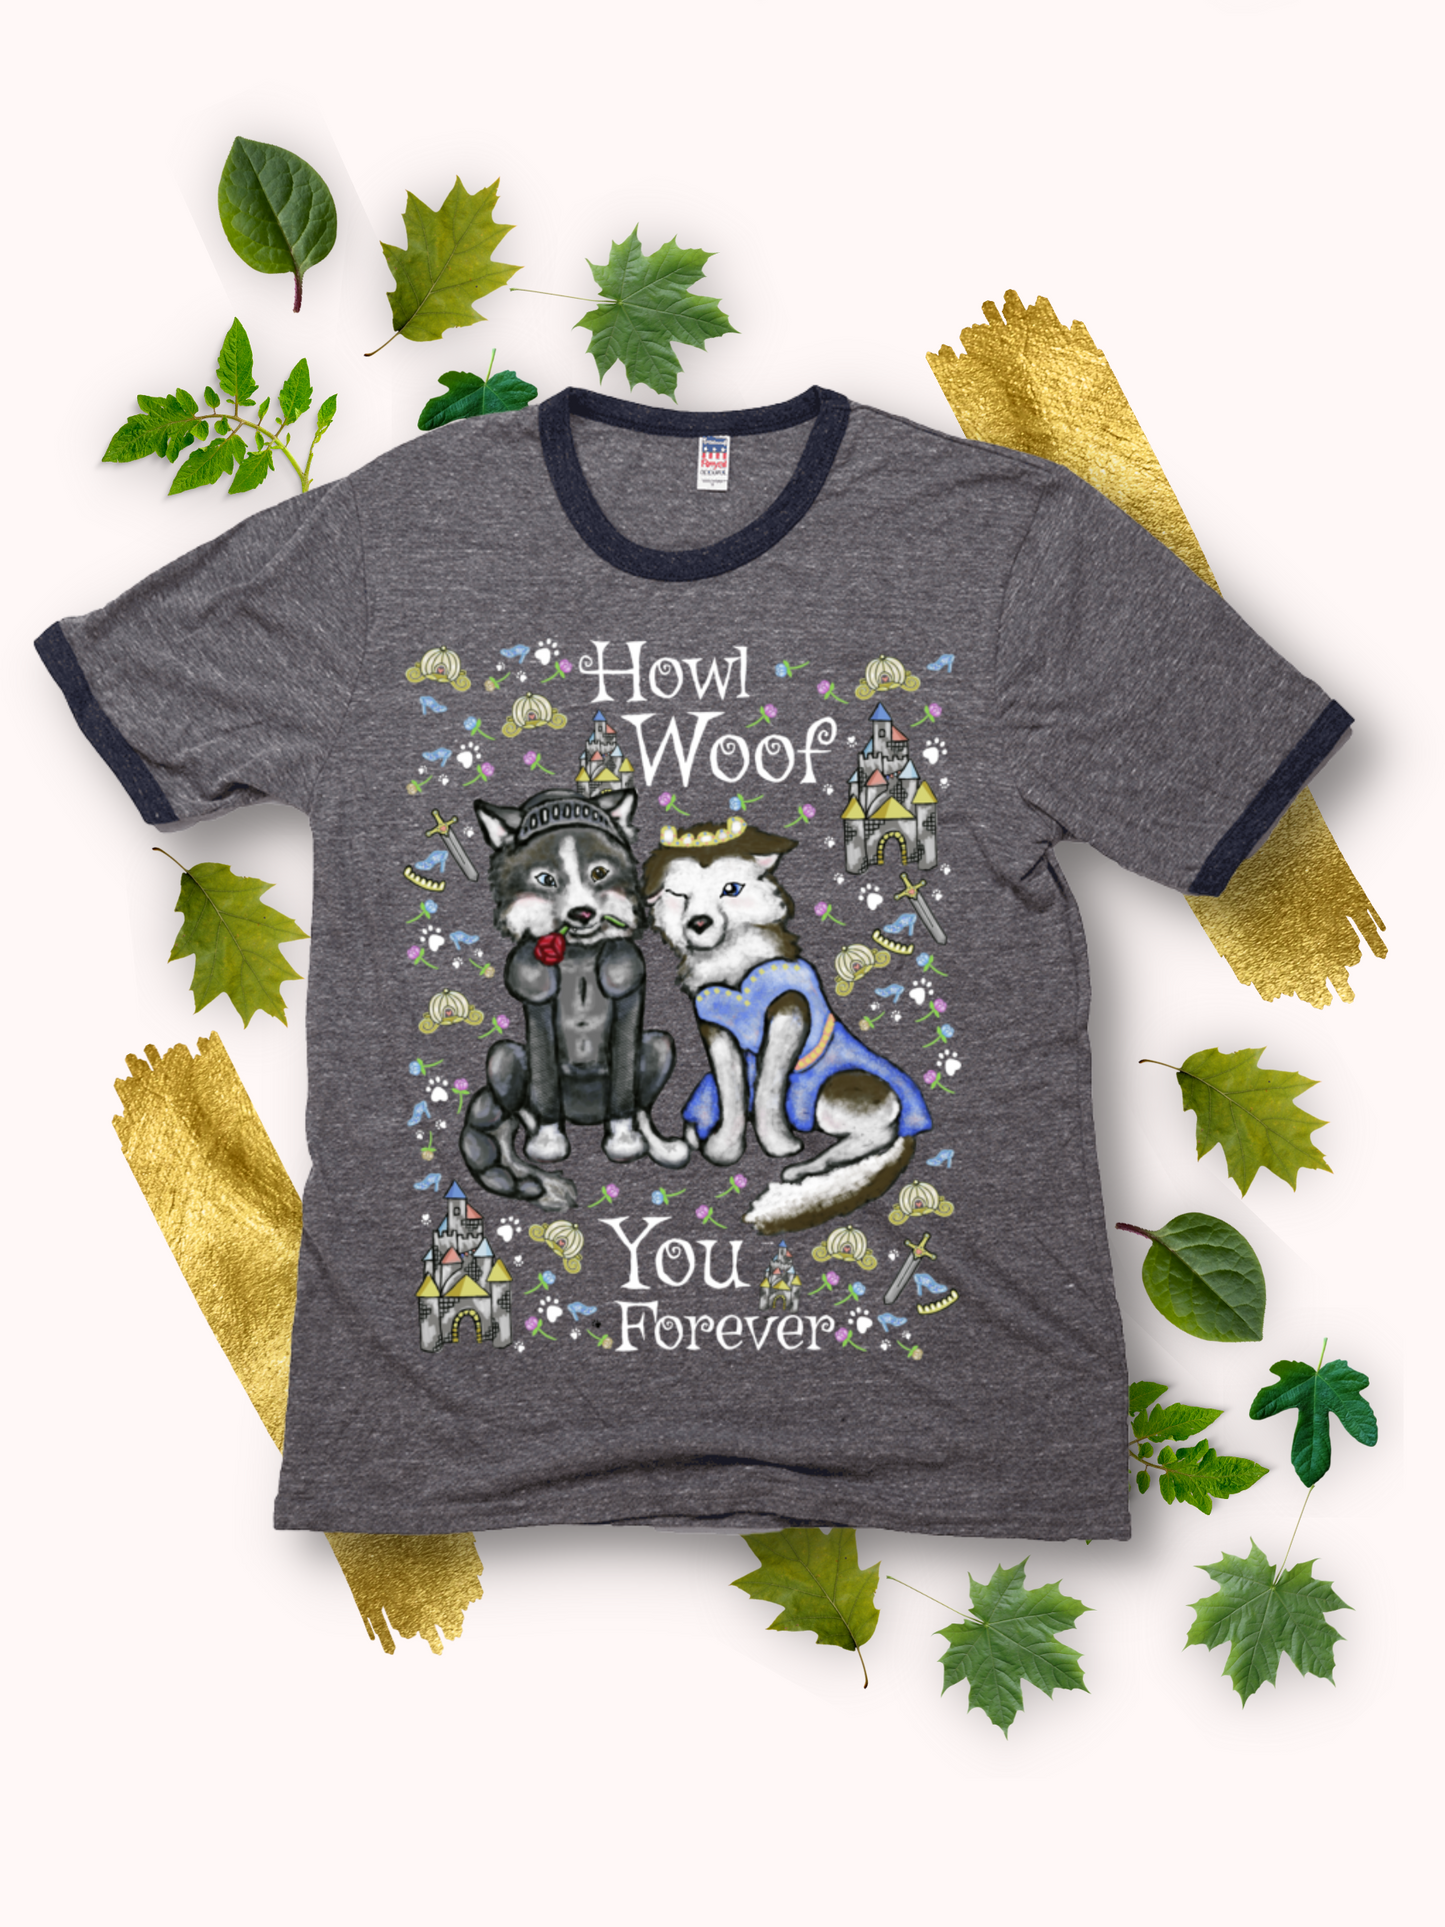 Howl Woof You - Unisex - Eco-Friendly USA Made Triblend Ringer Tee